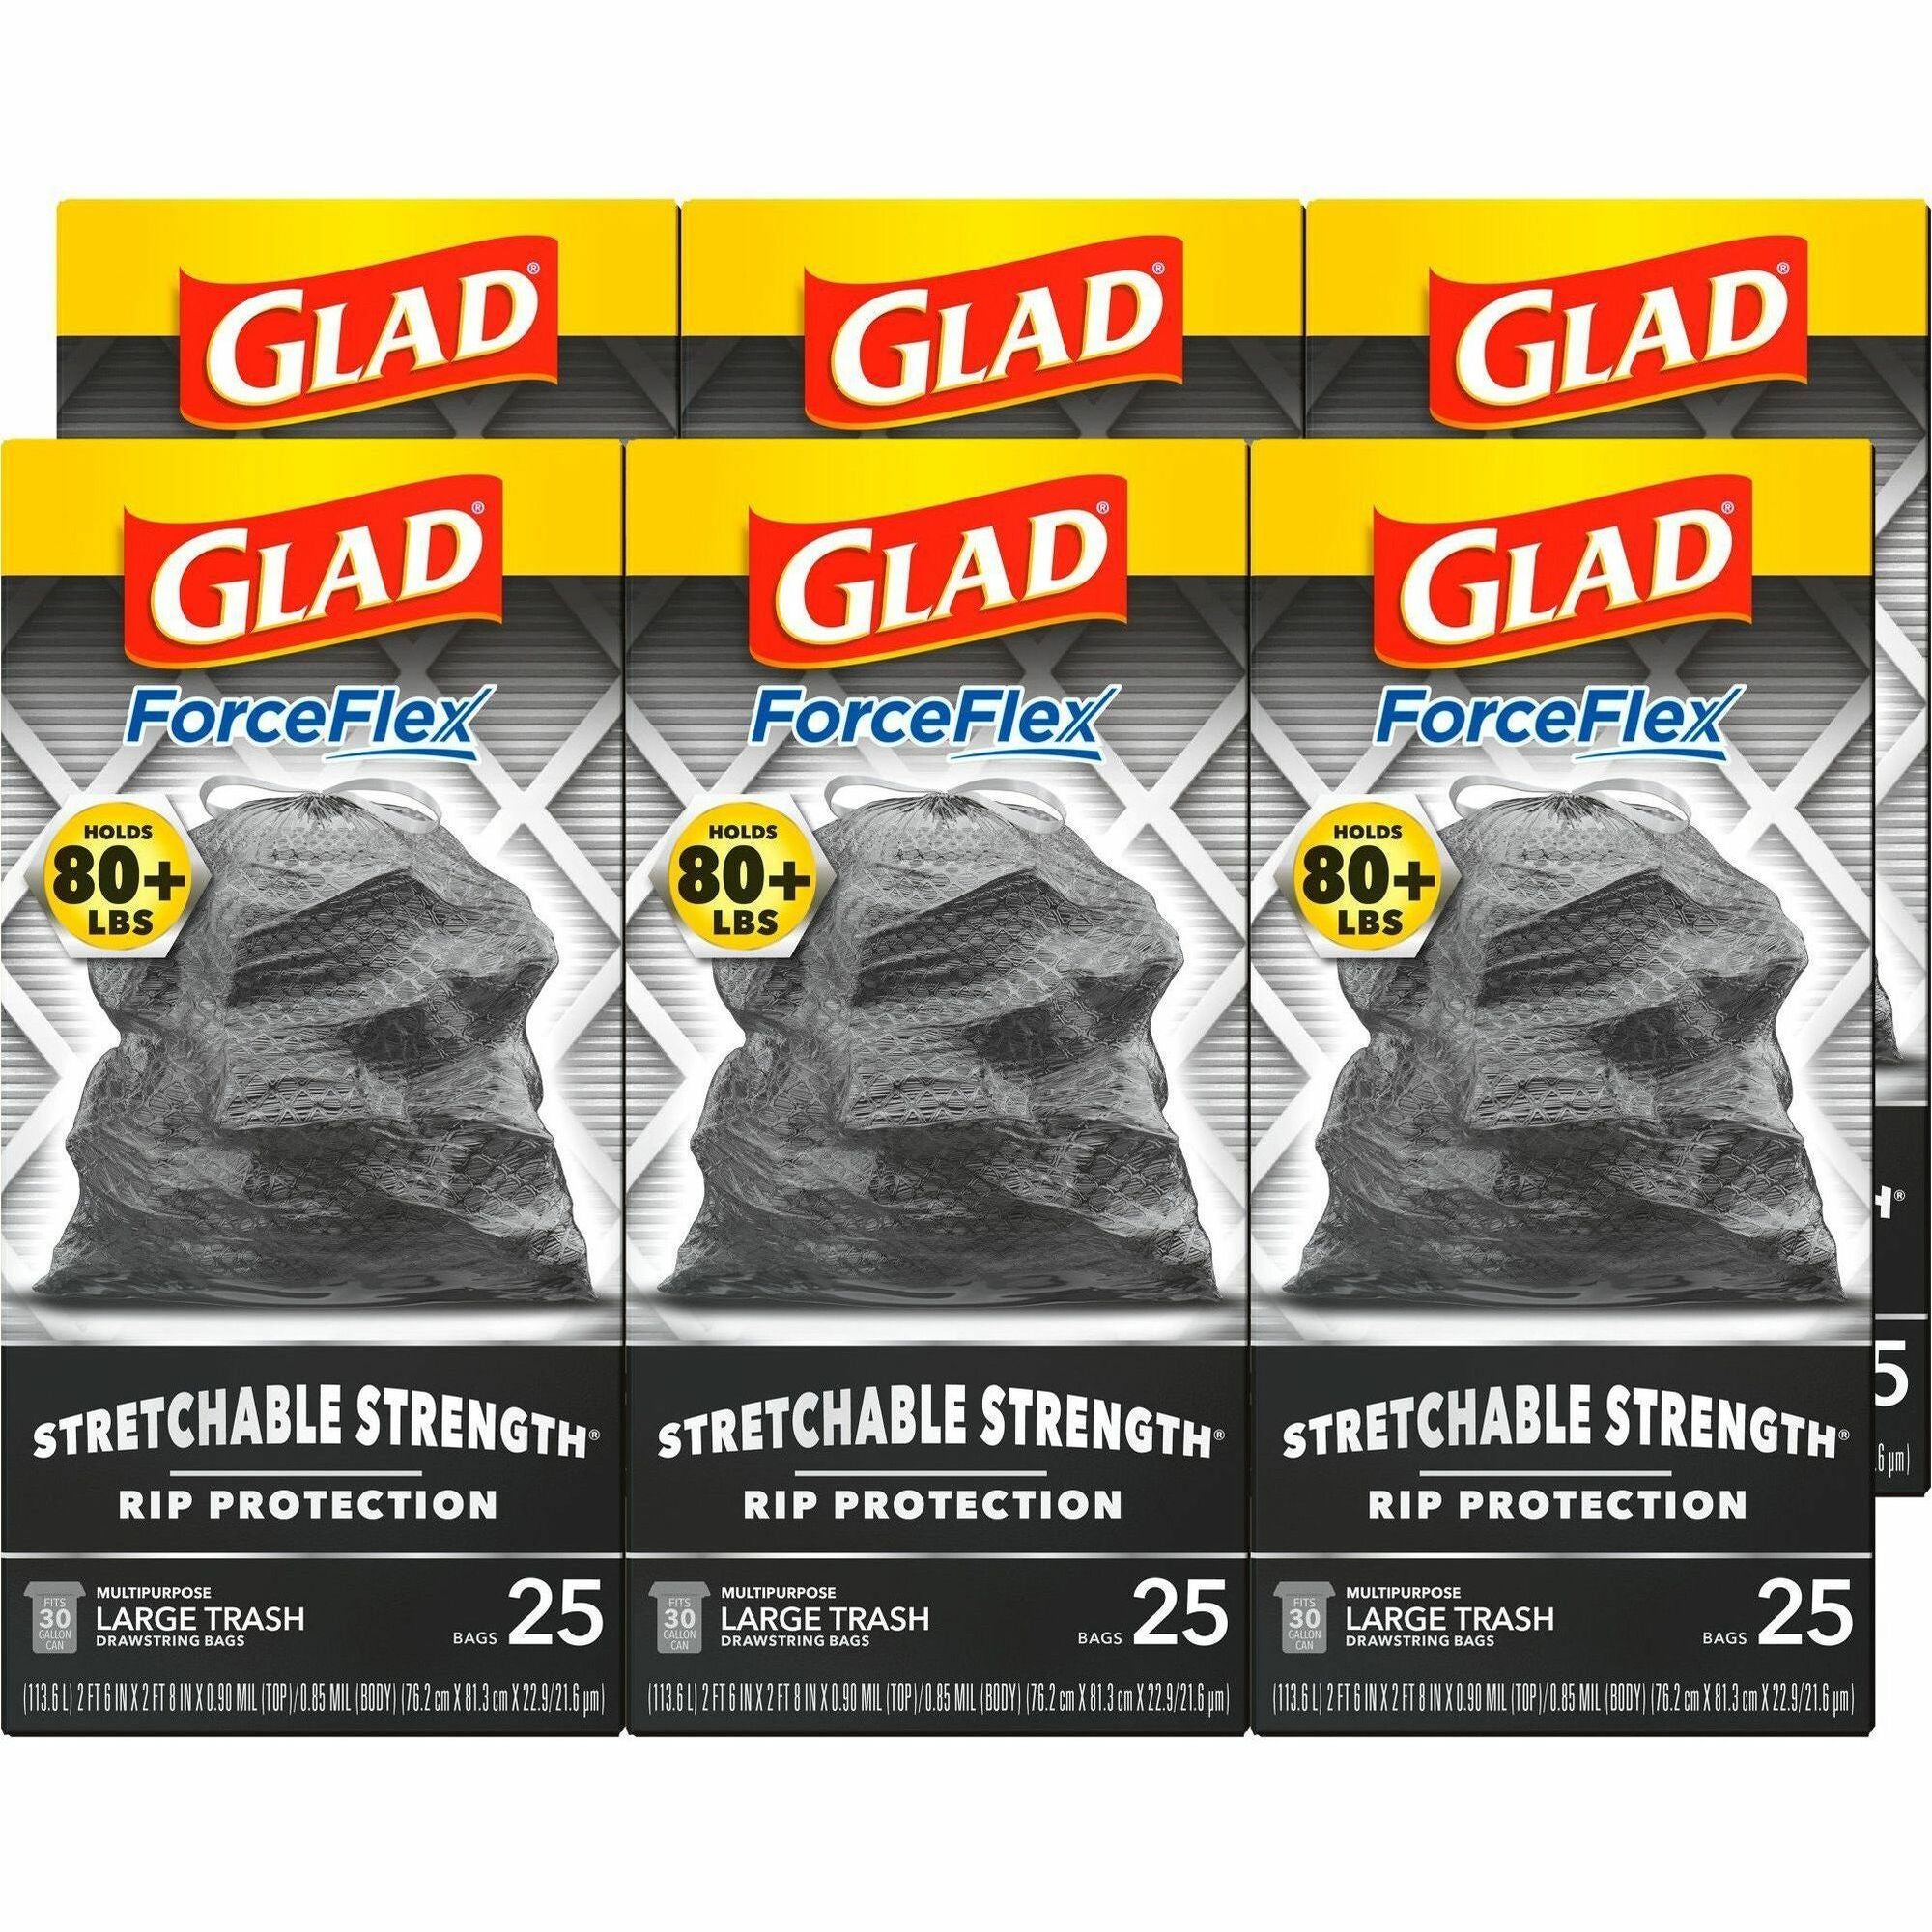 Glad ForceFlexPlus Large Drawstring Trash Bags - Large Size - 30 gal Capacity - 0.90 mil (23 Micron) Thickness - Drawstring Closure - Black - 6/Carton - 25 Per Box - Home, Office, Can - 1